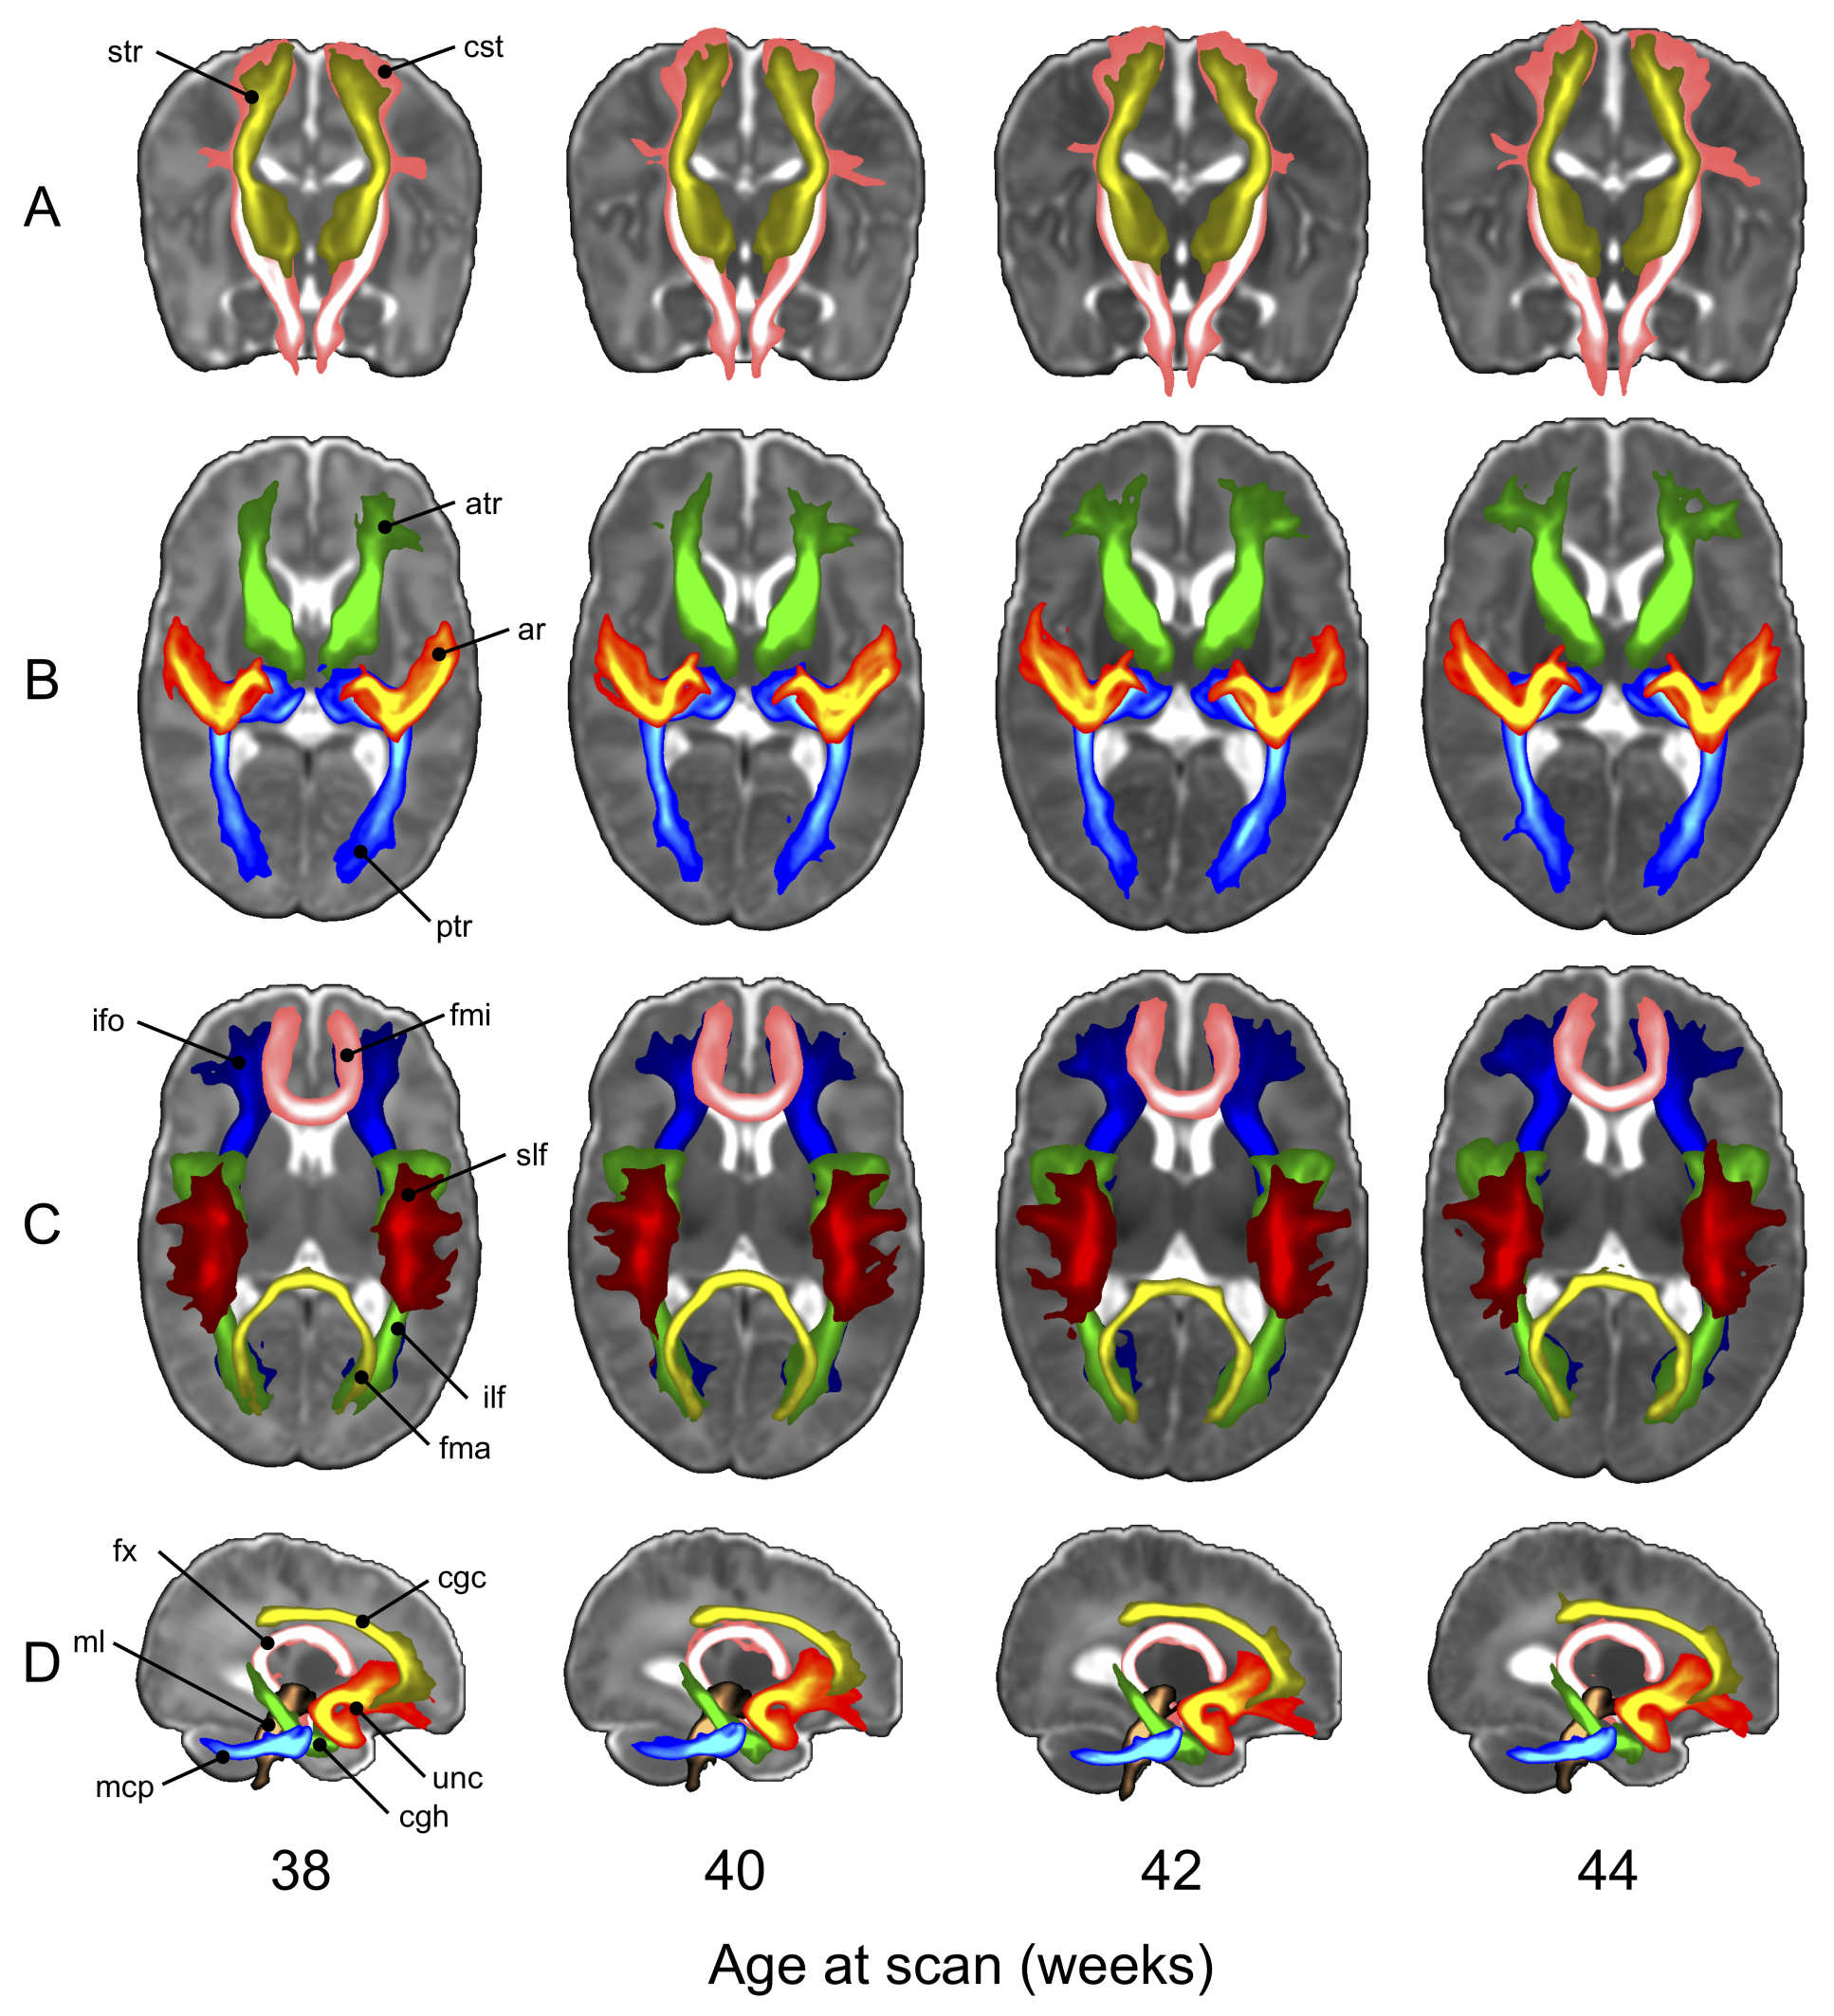 MRI scans of infant brains from the dHCP project